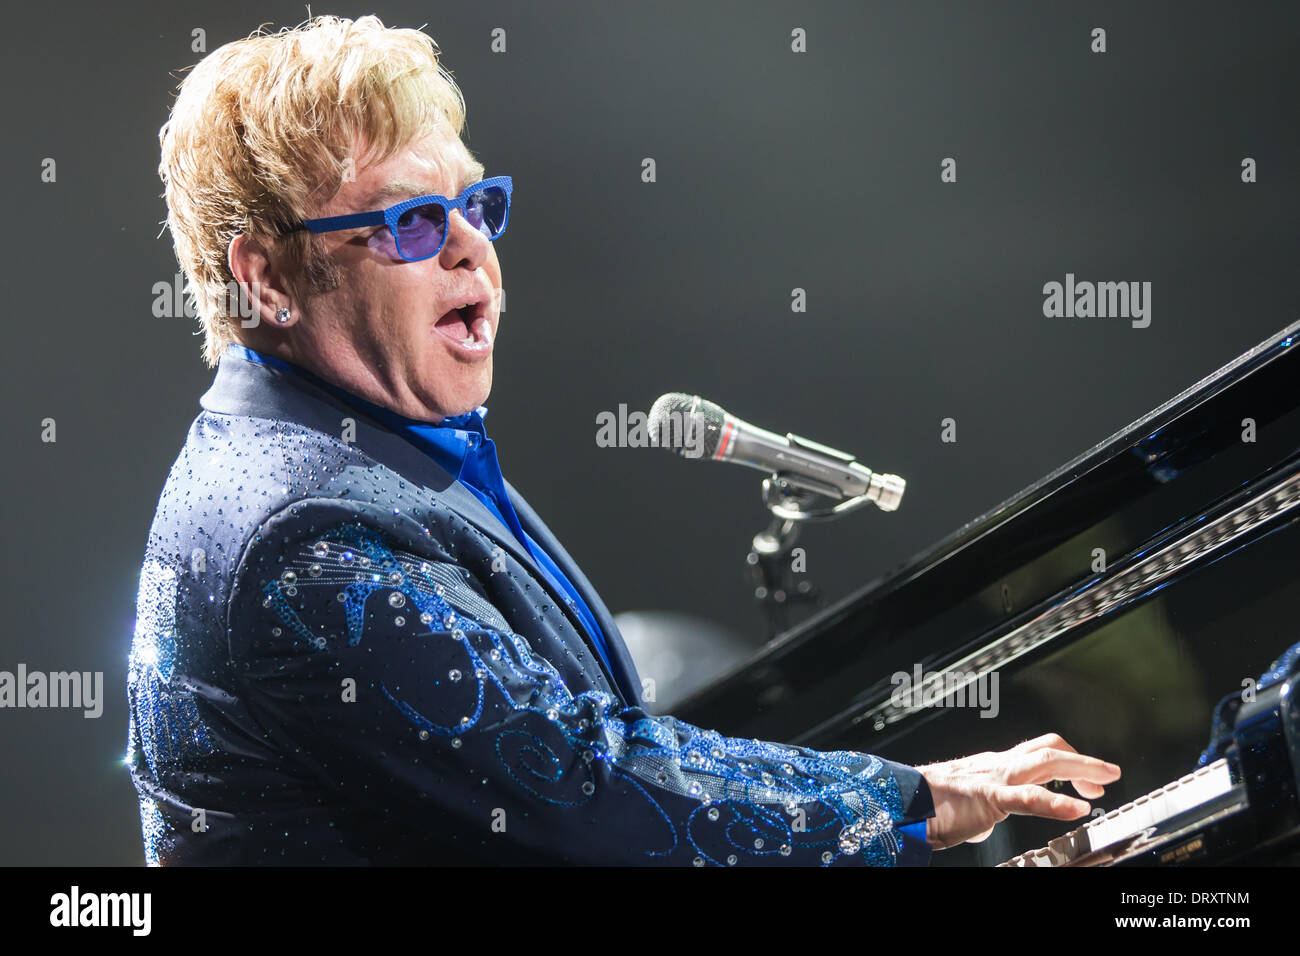 London Ontario, Canada. February 3, 2014. Sir Elton John performs in concert at Budweiser Gardens.  It was his first Canadian performance of his 2014 World Tour. His last performance in London was in 2006 at the same venue. Credit:  Mark Spowart/Alamy Live News Stock Photo